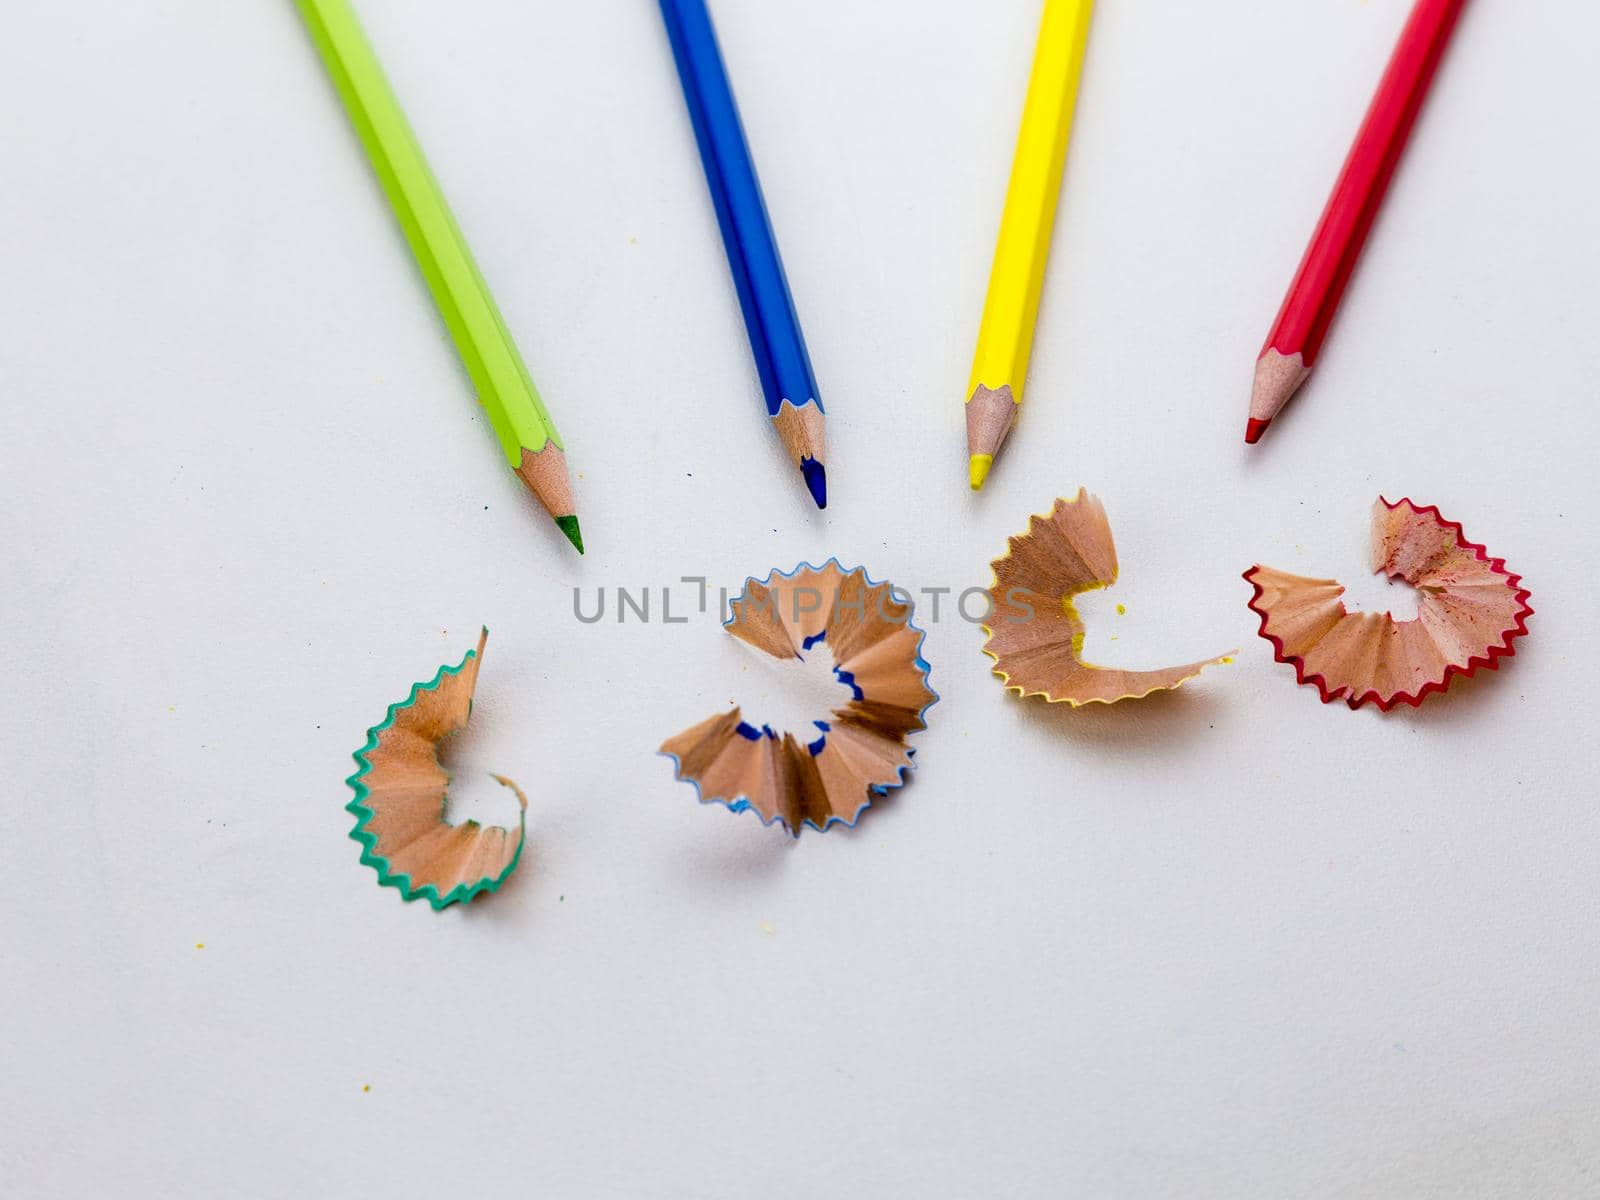 Colored pencil crayons in a row with shavings by imagesbykenny